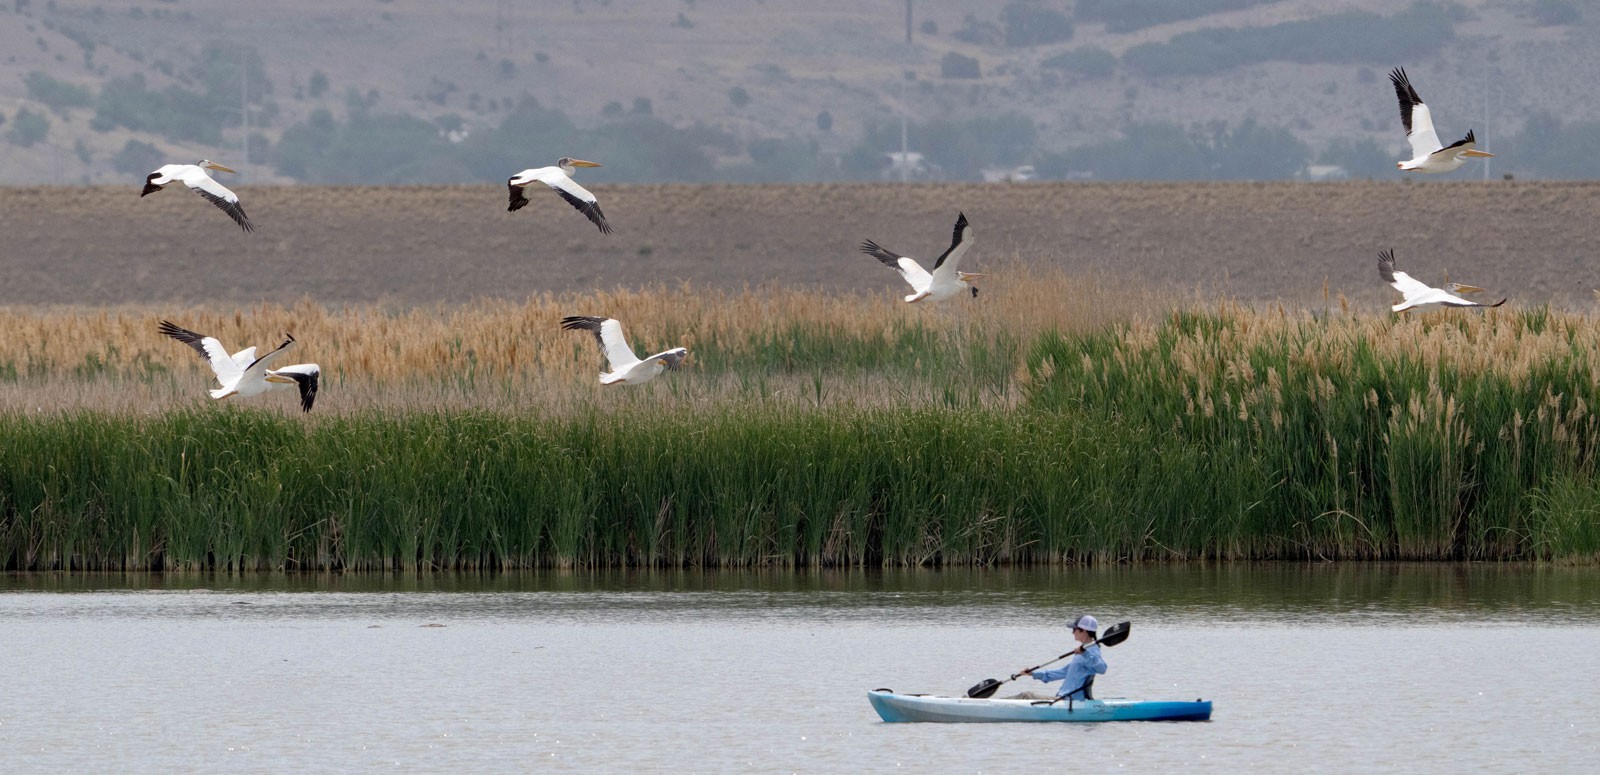 Pelicans flying over a kayaker.